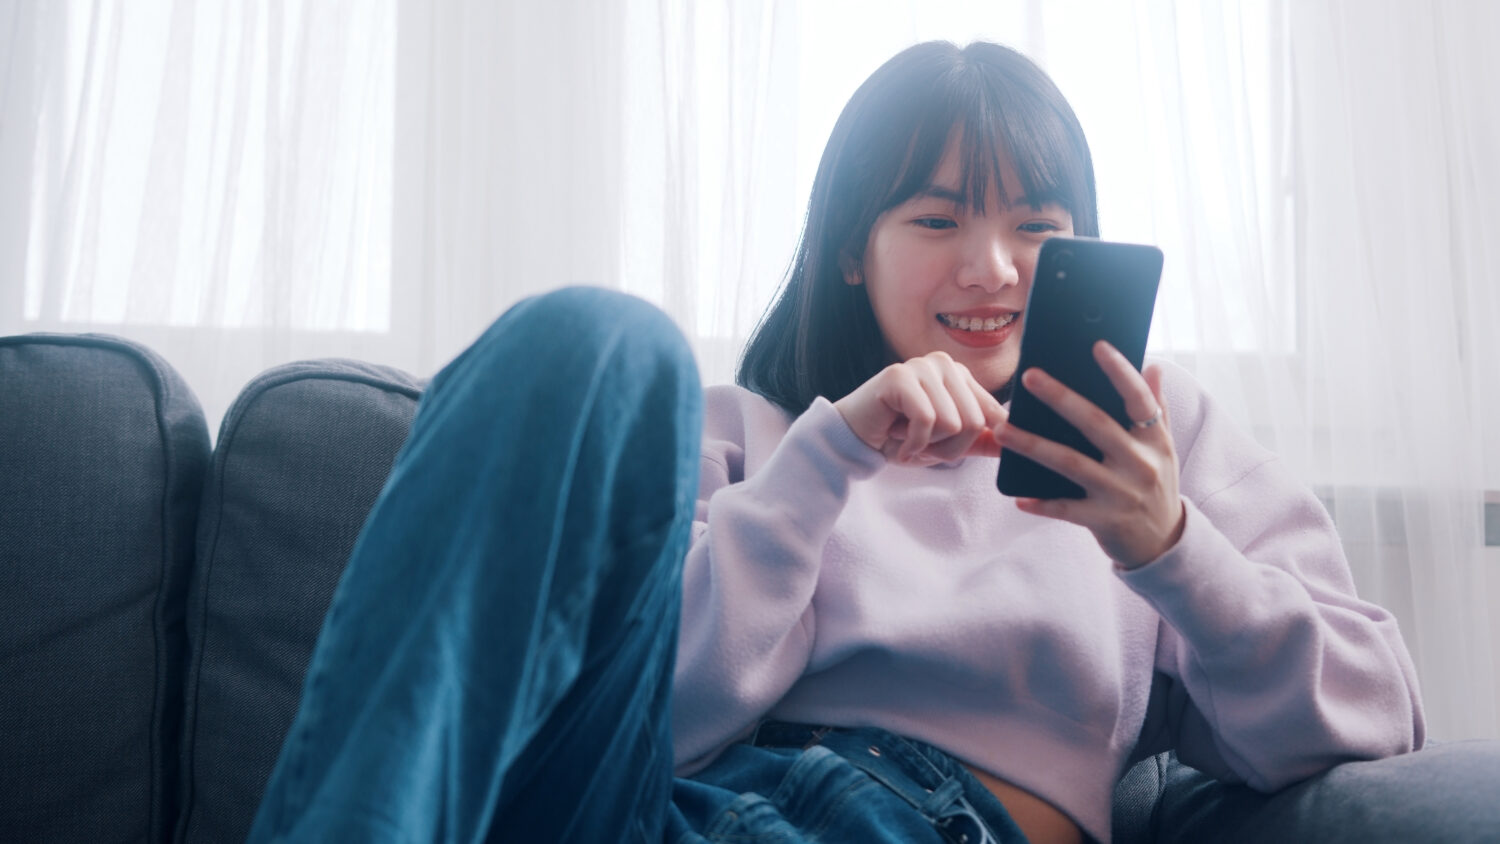 young asian woman sitting on a couch smiling at her phone